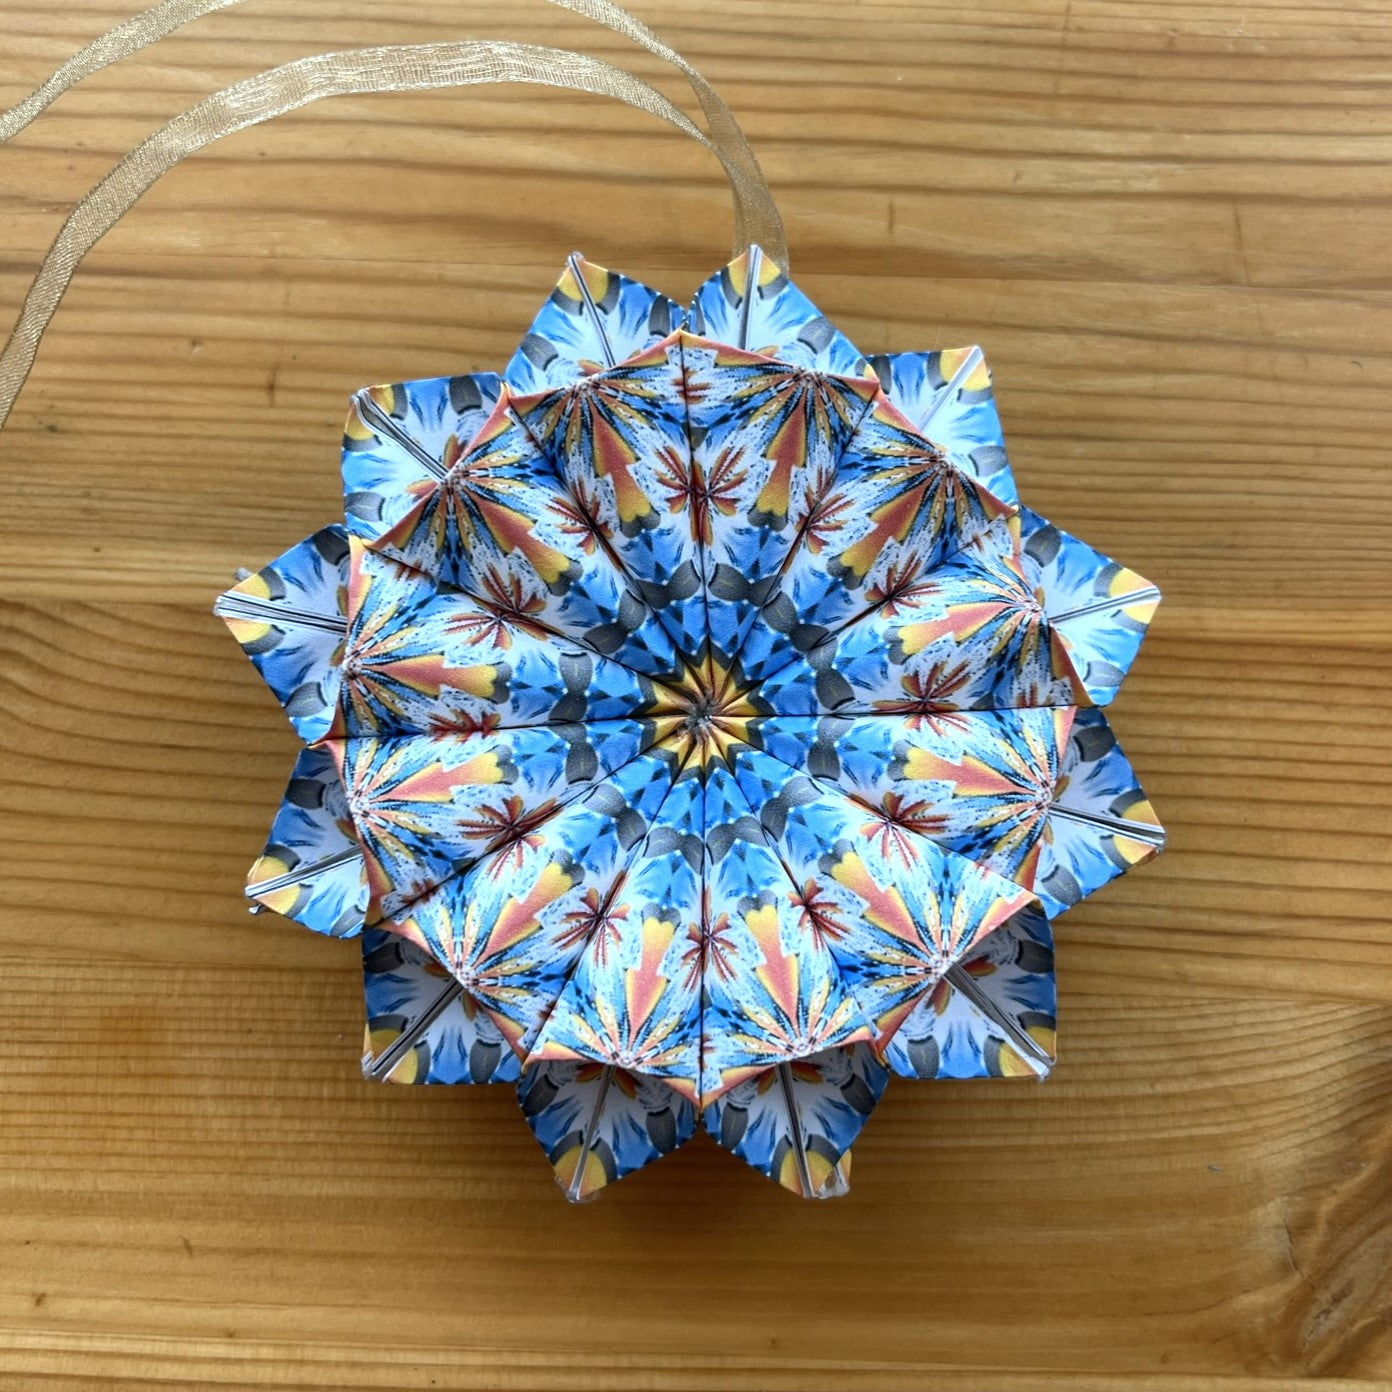 Hand-Painted Origami Ornaments